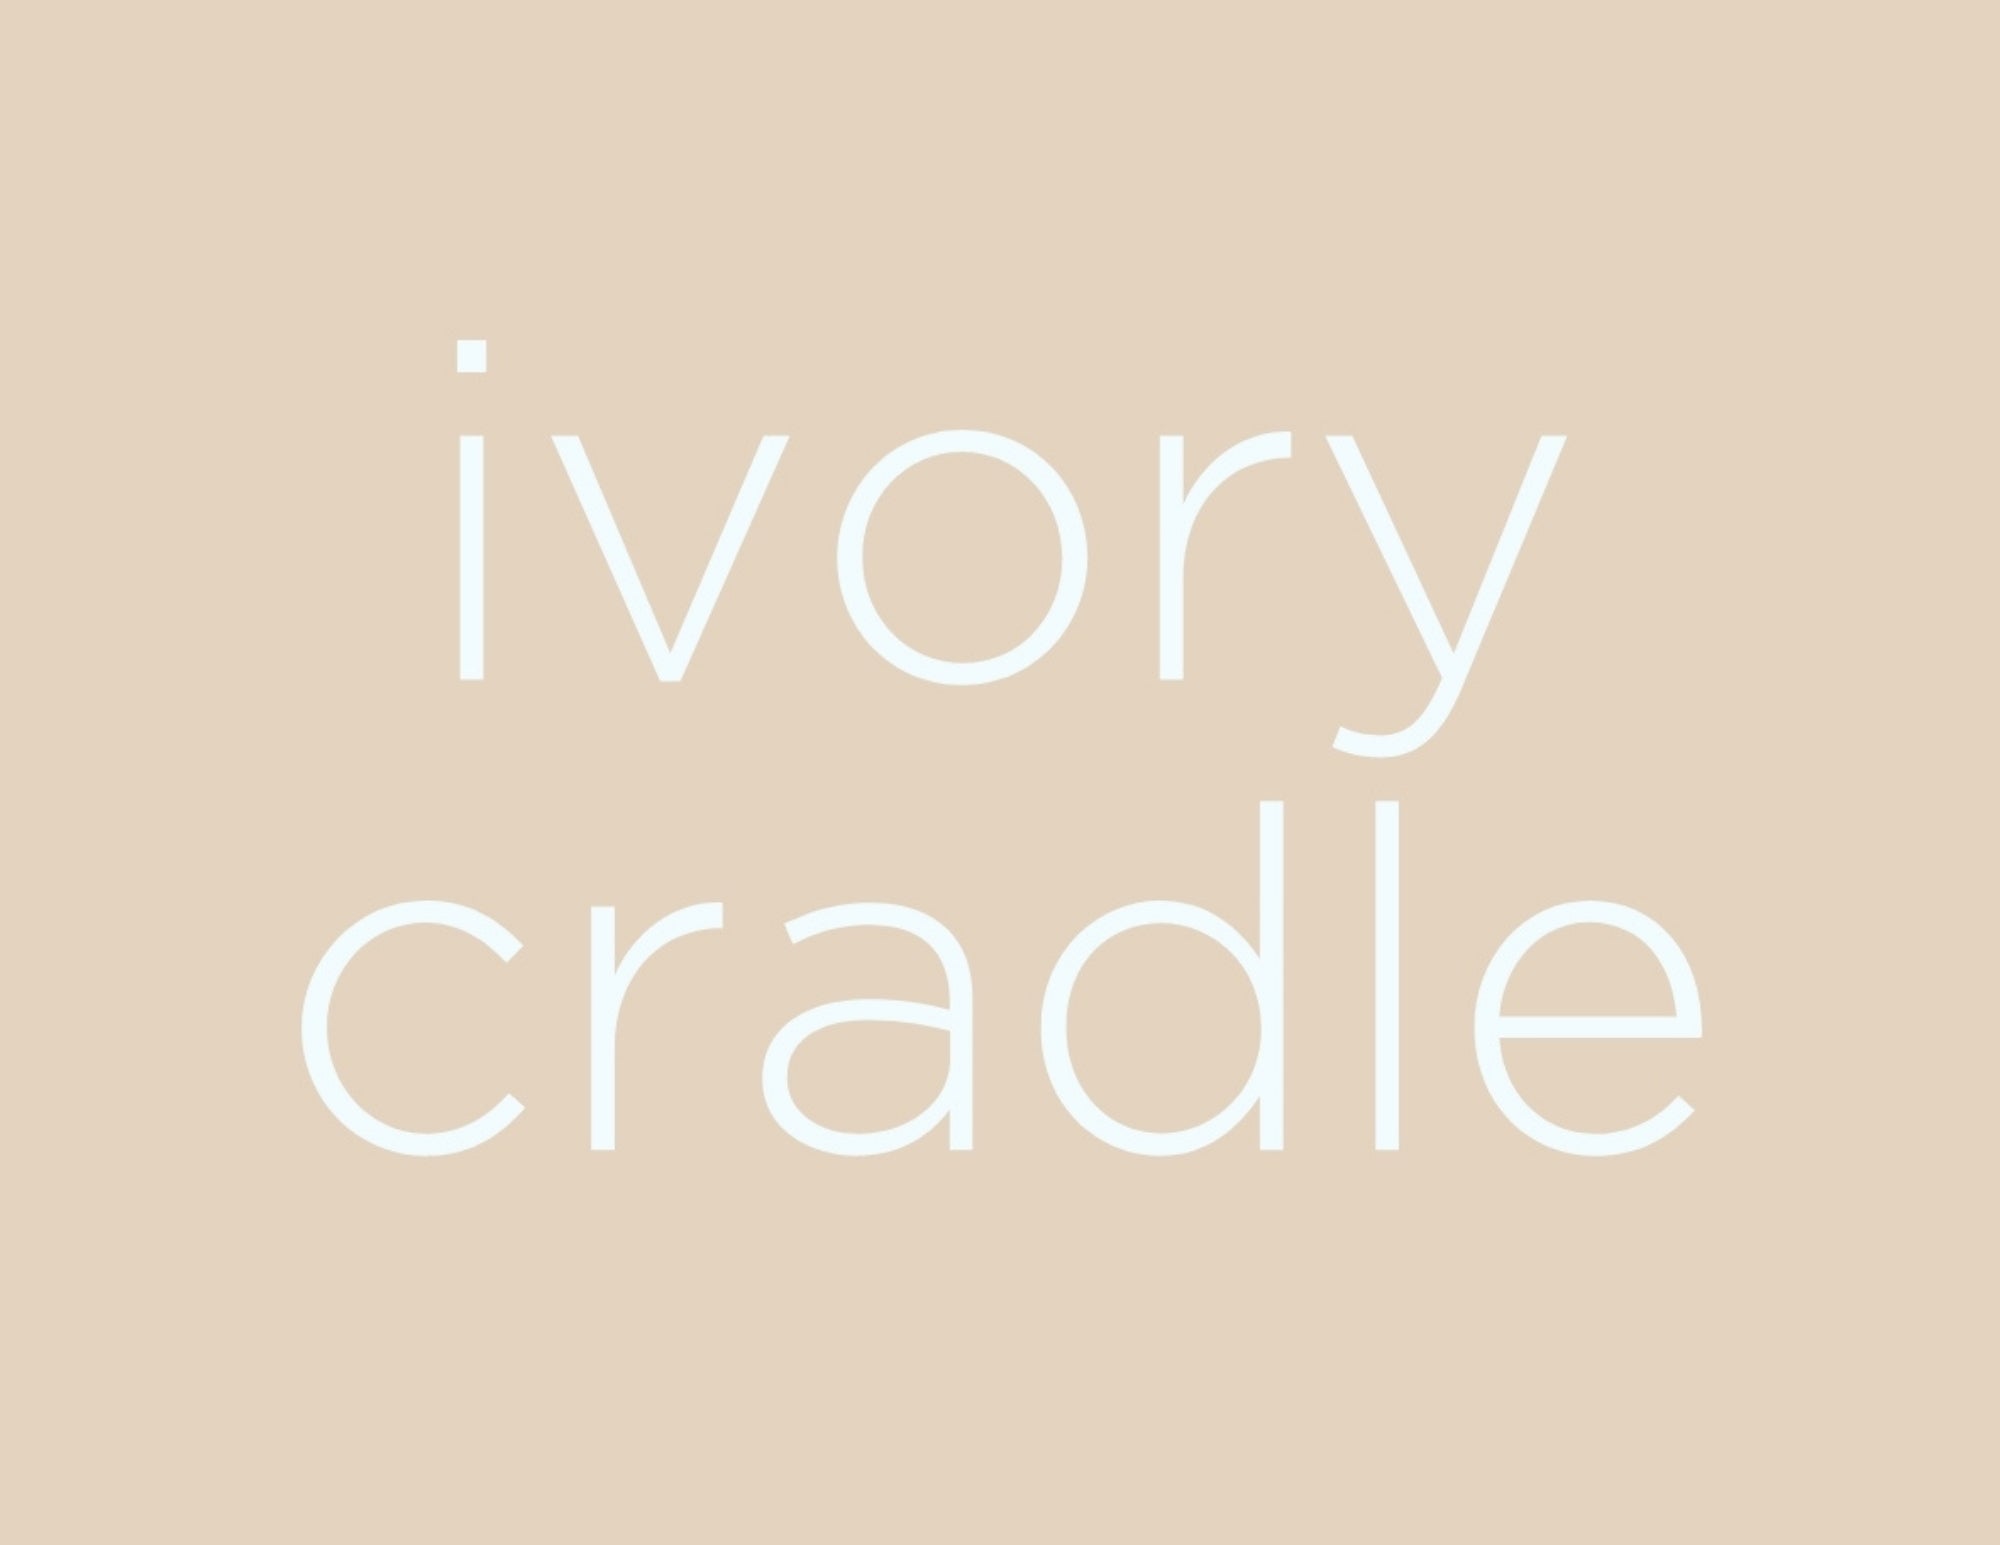 Ivory Cradle coupon codes